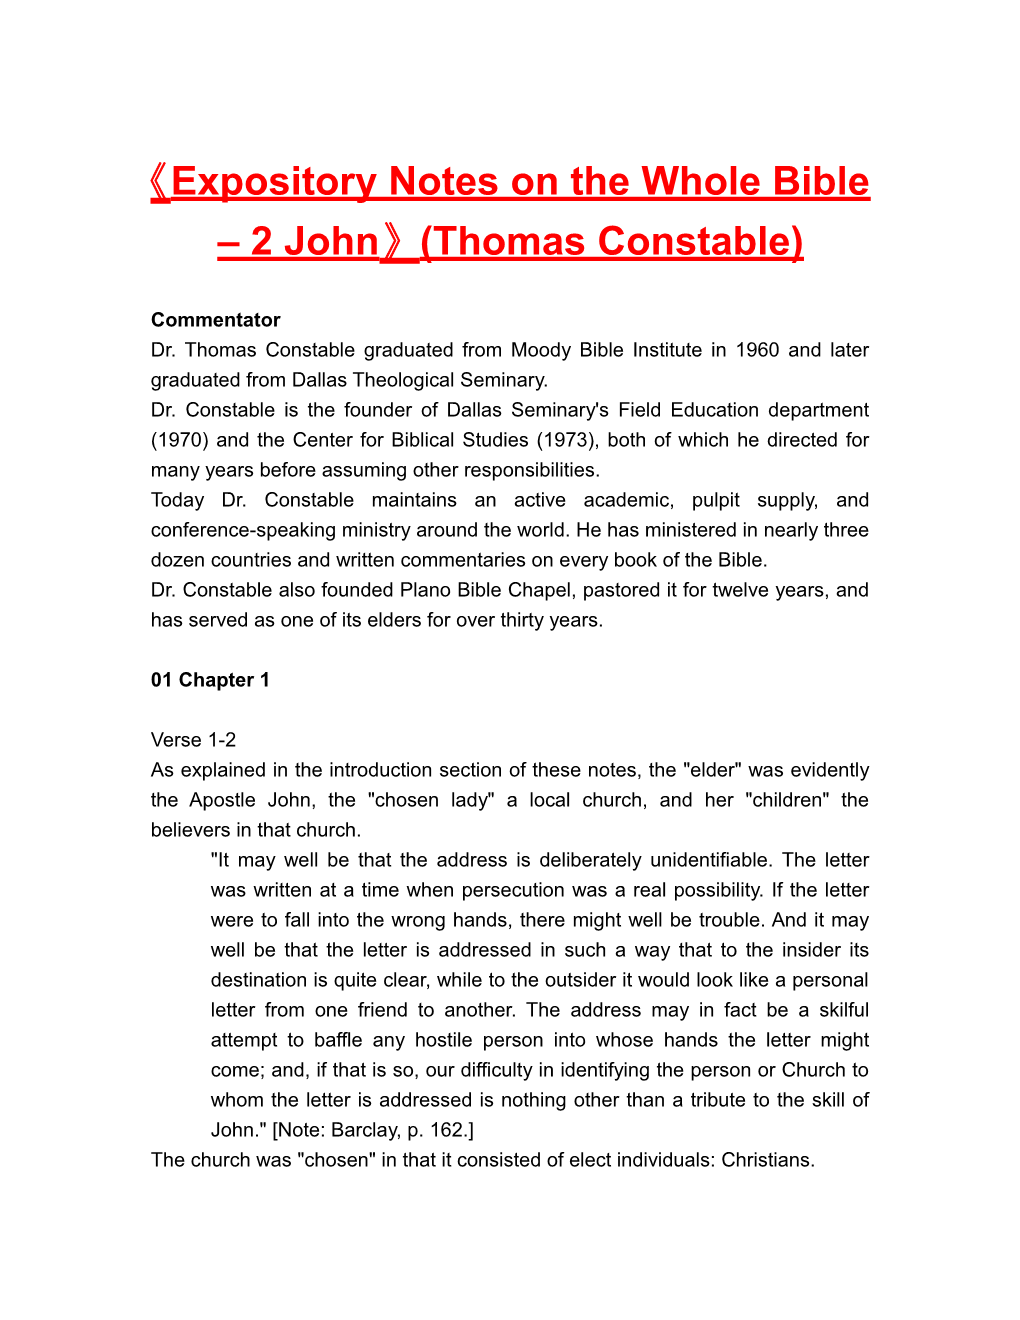 Expositorynotes on the Wholebible 2 John (Thomas Constable)